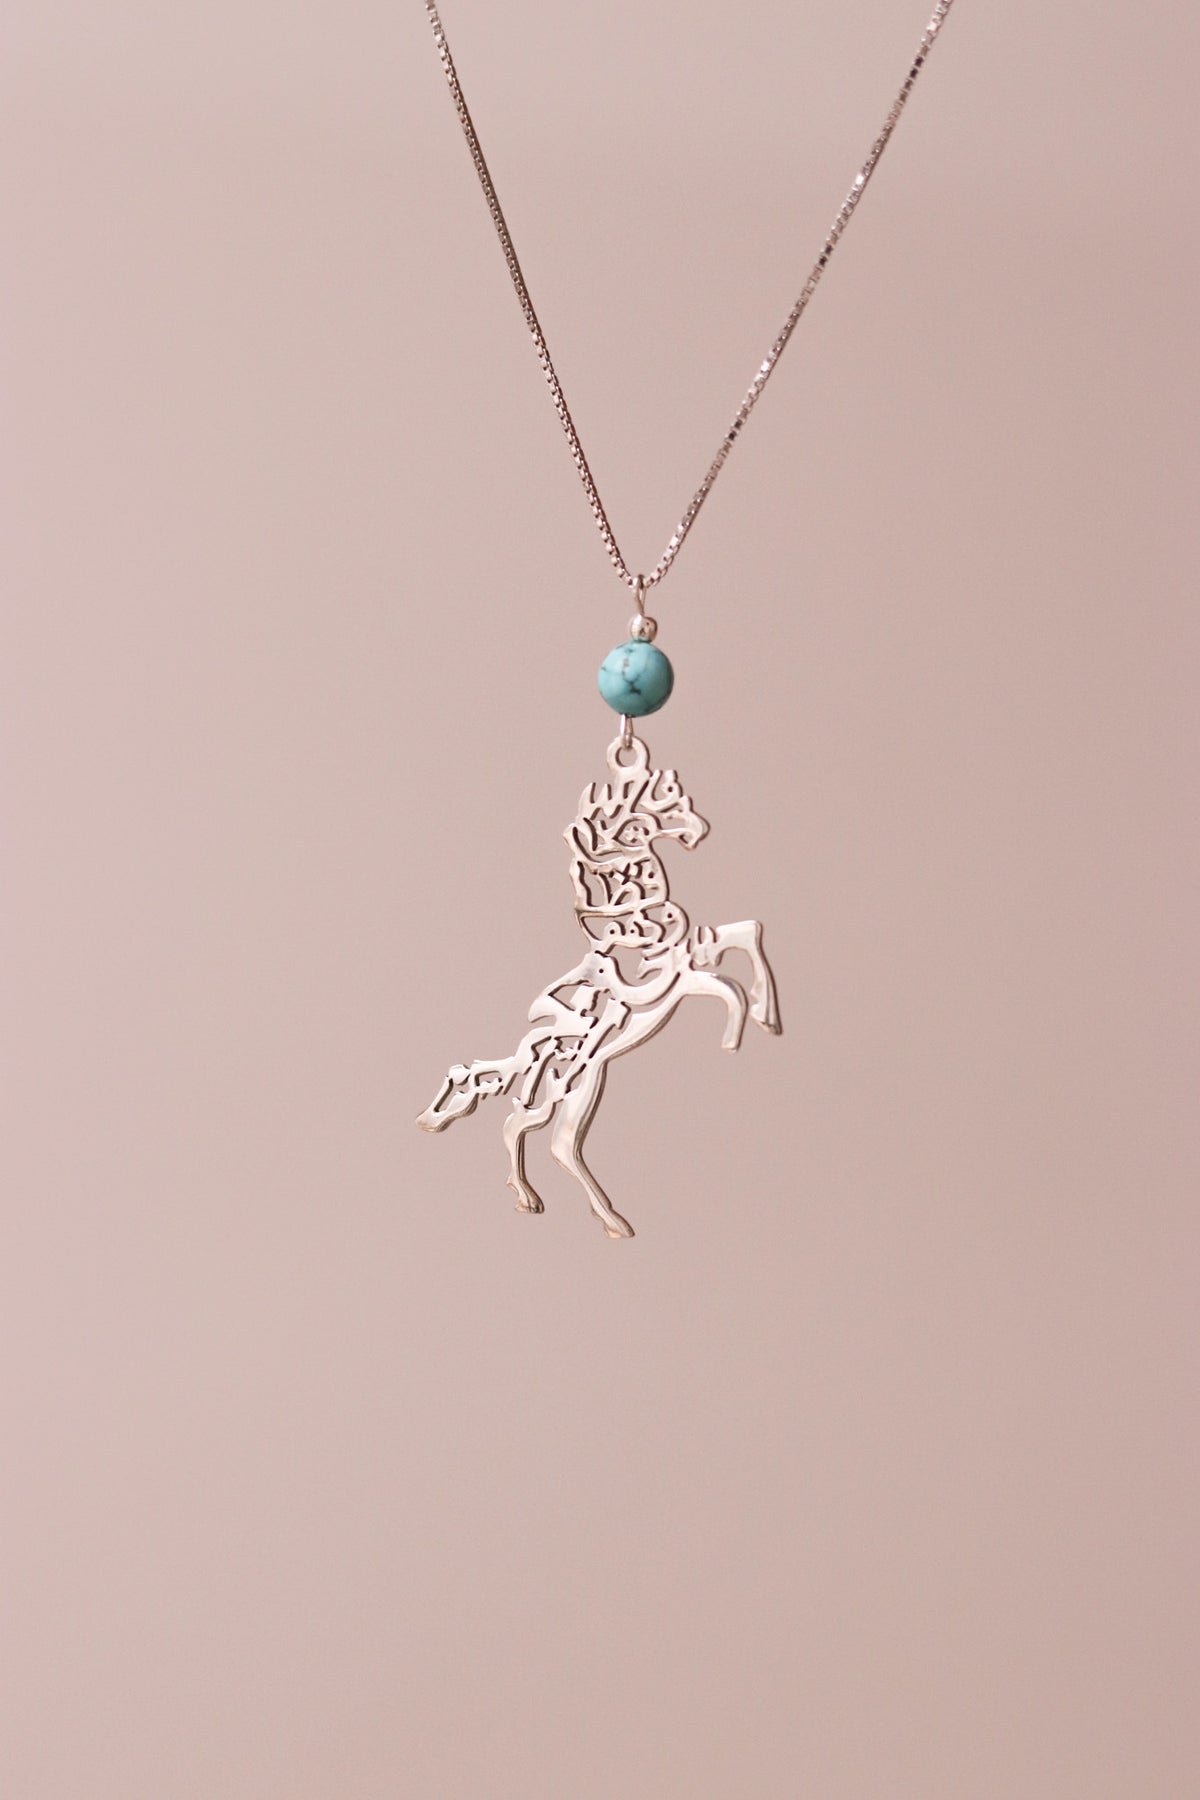 Horse car mirror / Necklace with a verse from "سورة يوسف" with turquoise stone